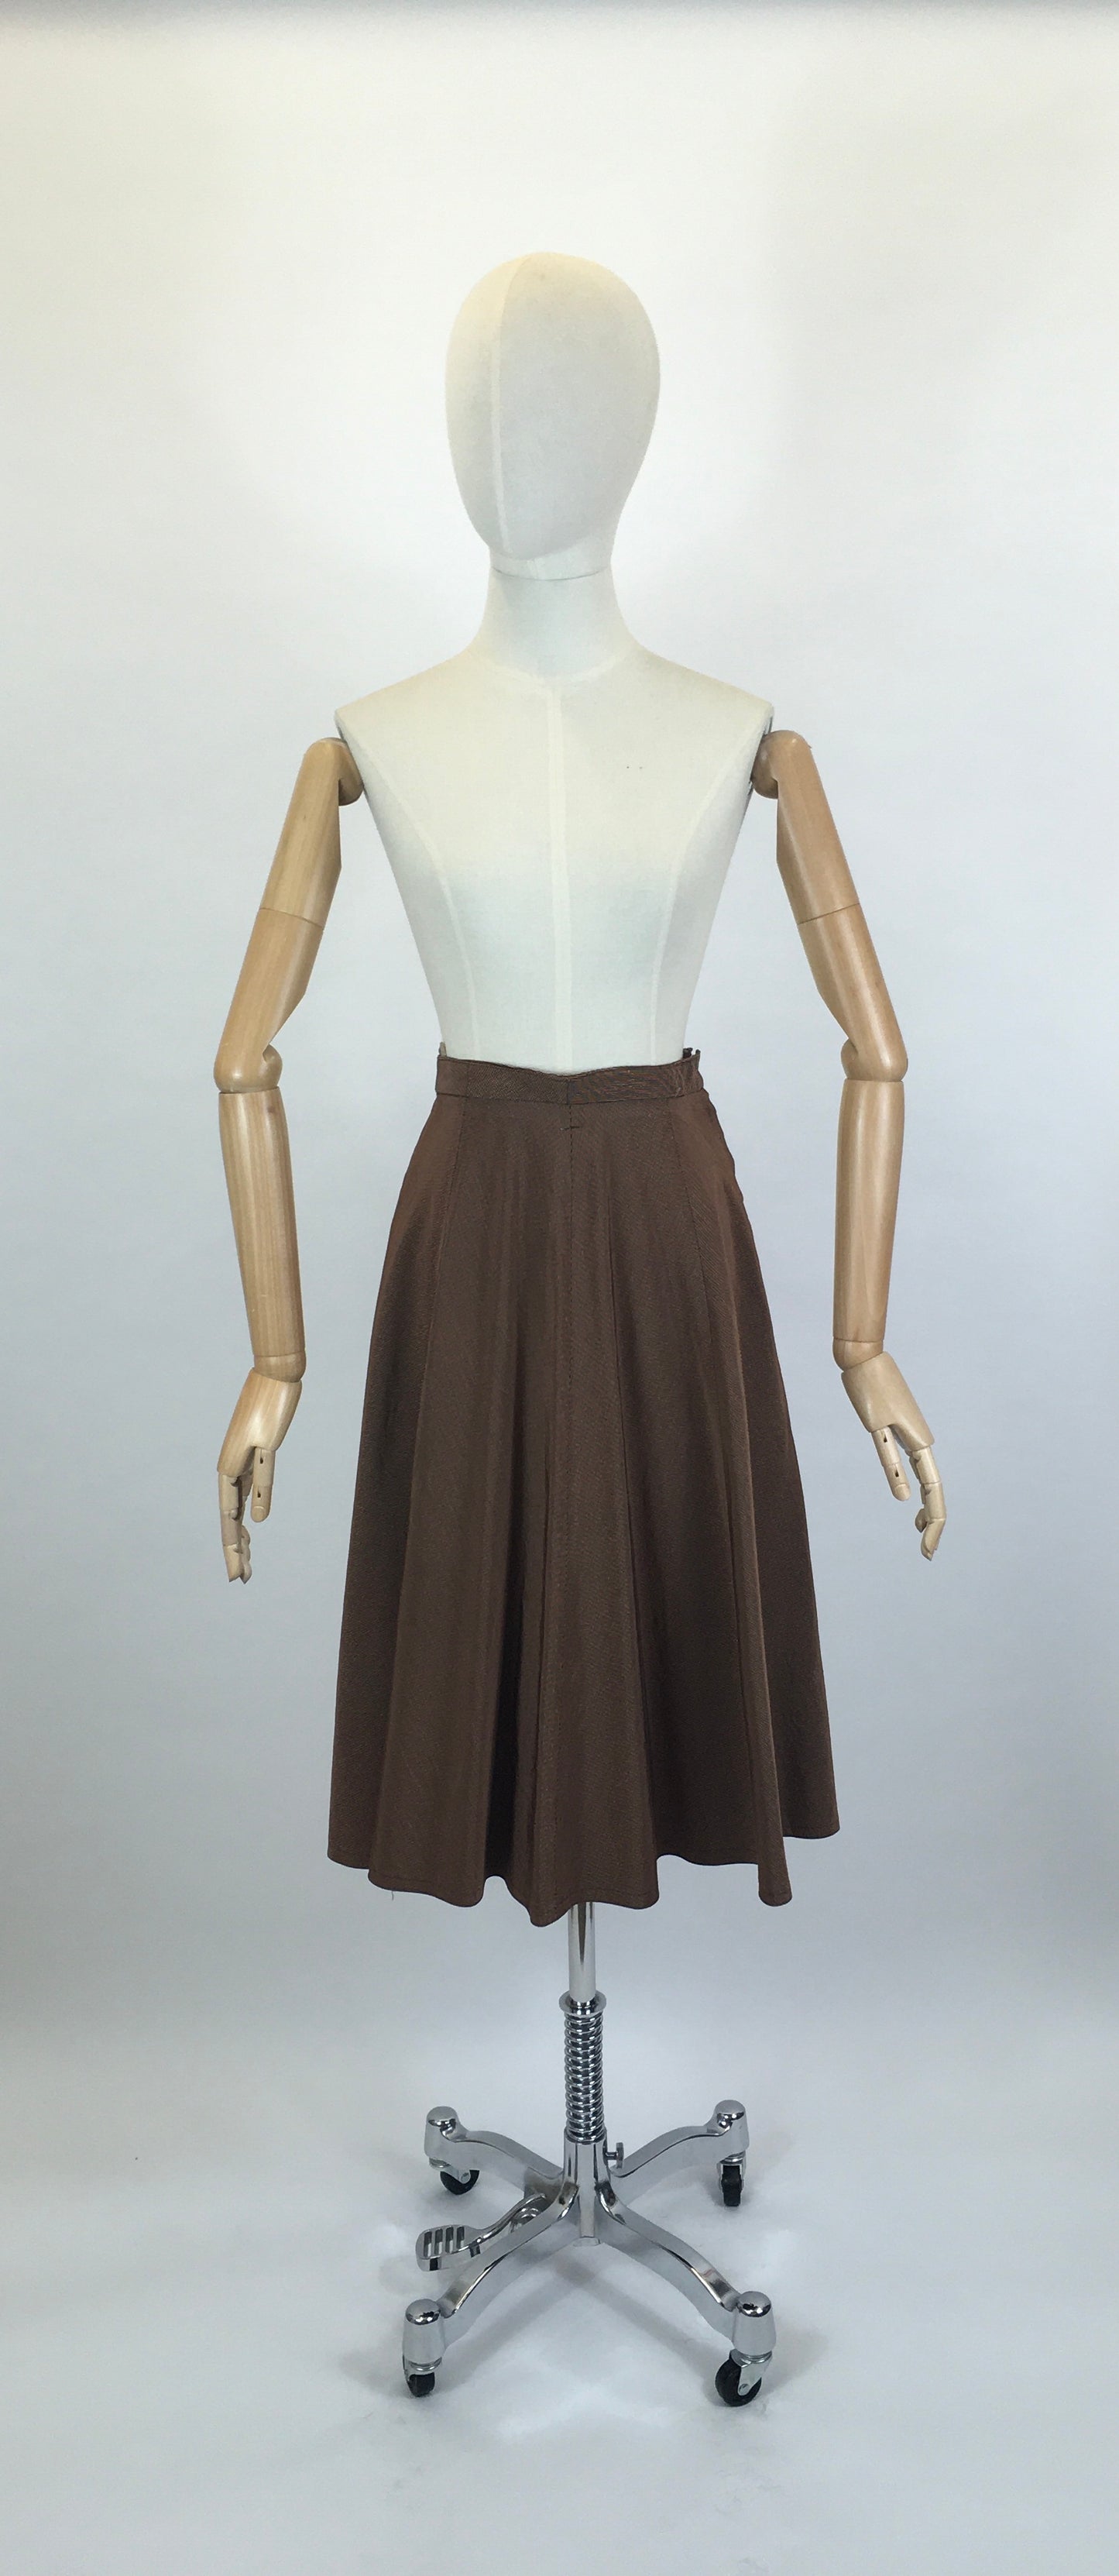 Original 1940’s Skirt - With a Fabulous 8 Gore Panel Sweep